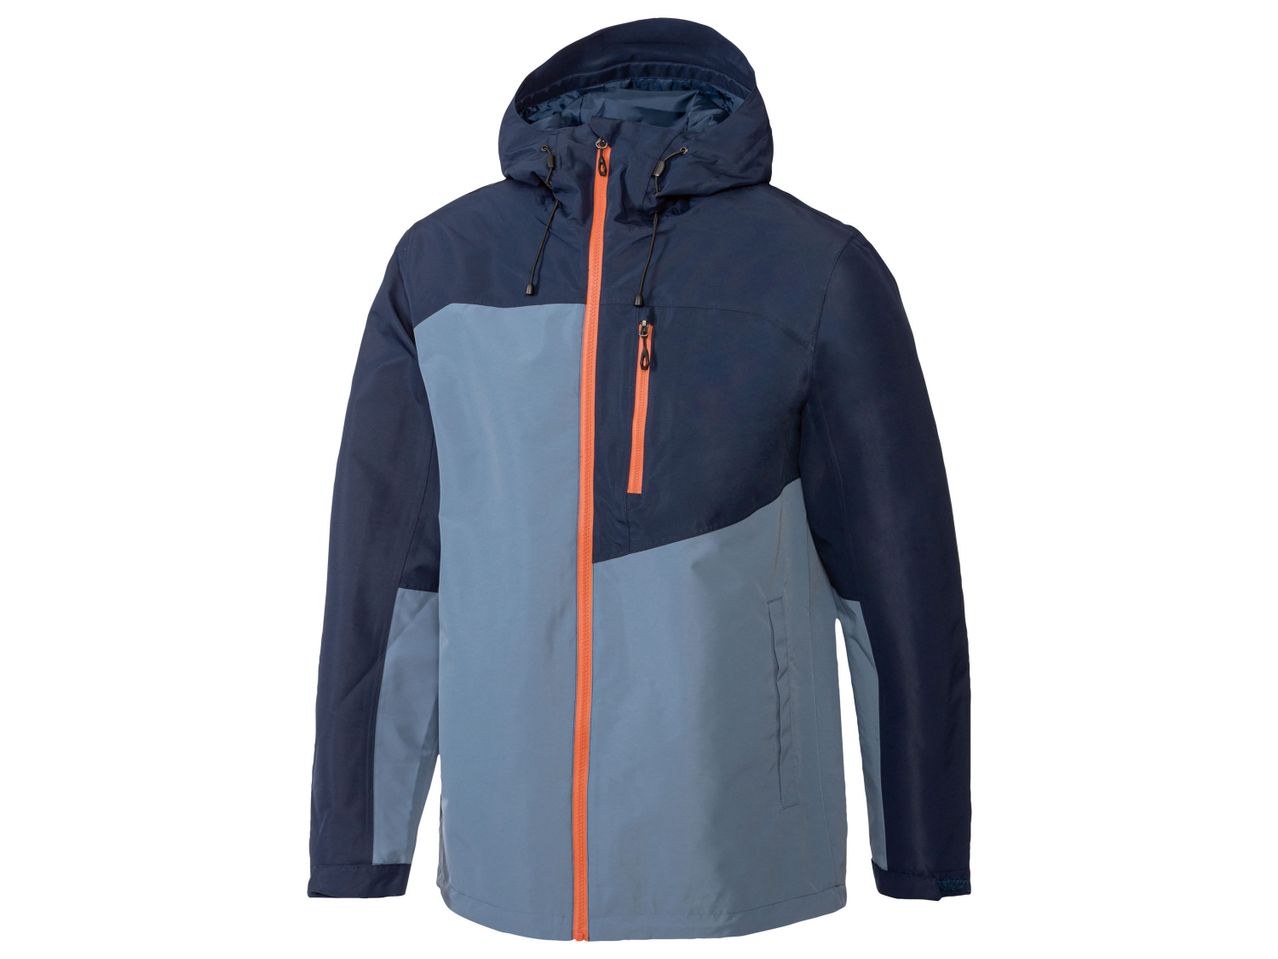 Go to full screen view: Men’s All Weather Jacket - Image 1